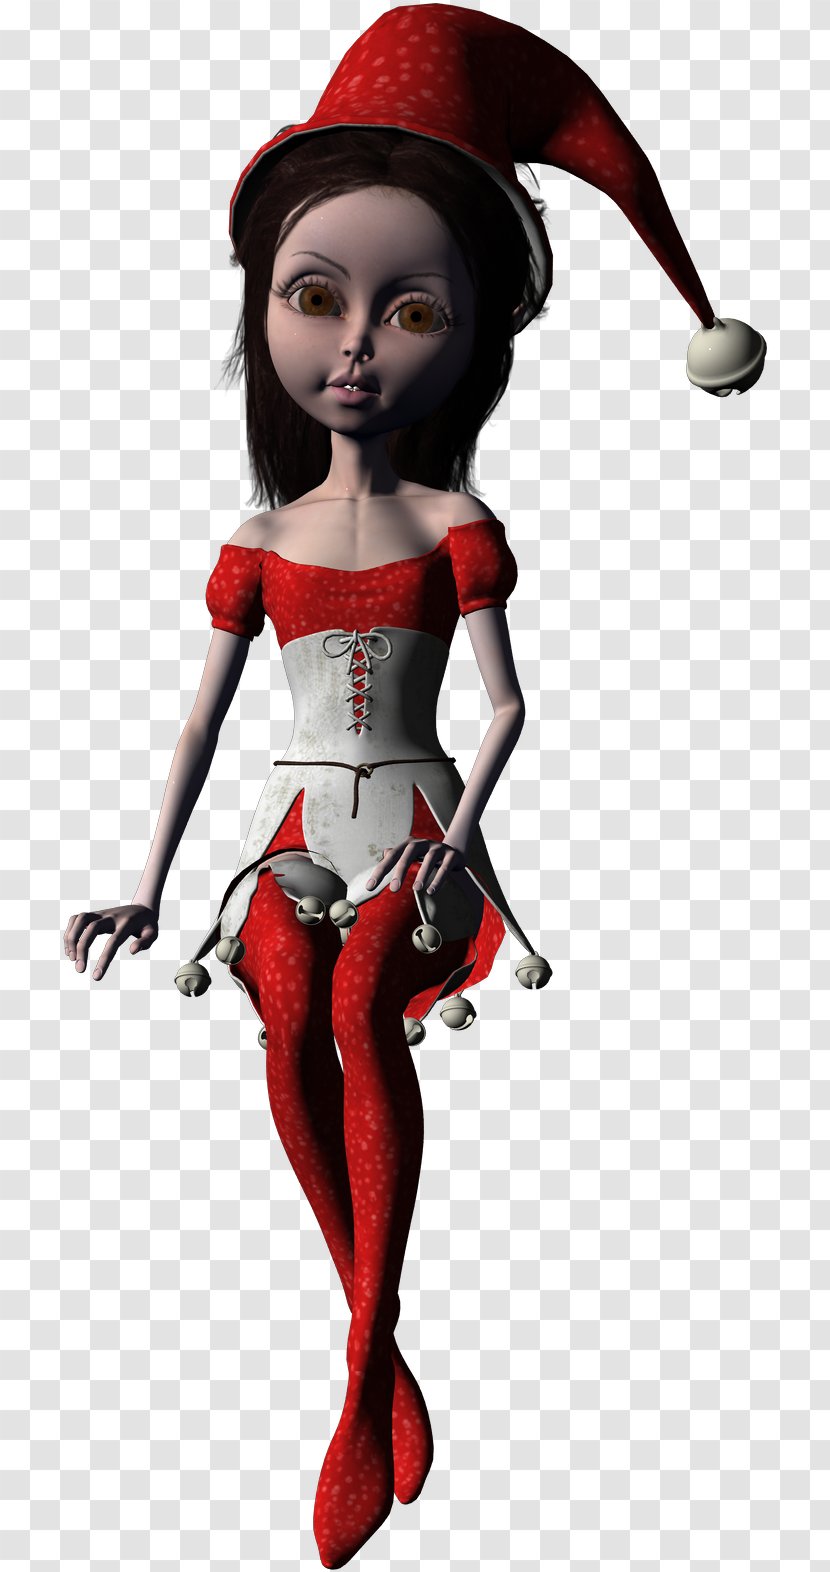 Doll Legendary Creature - Fictional Character Transparent PNG